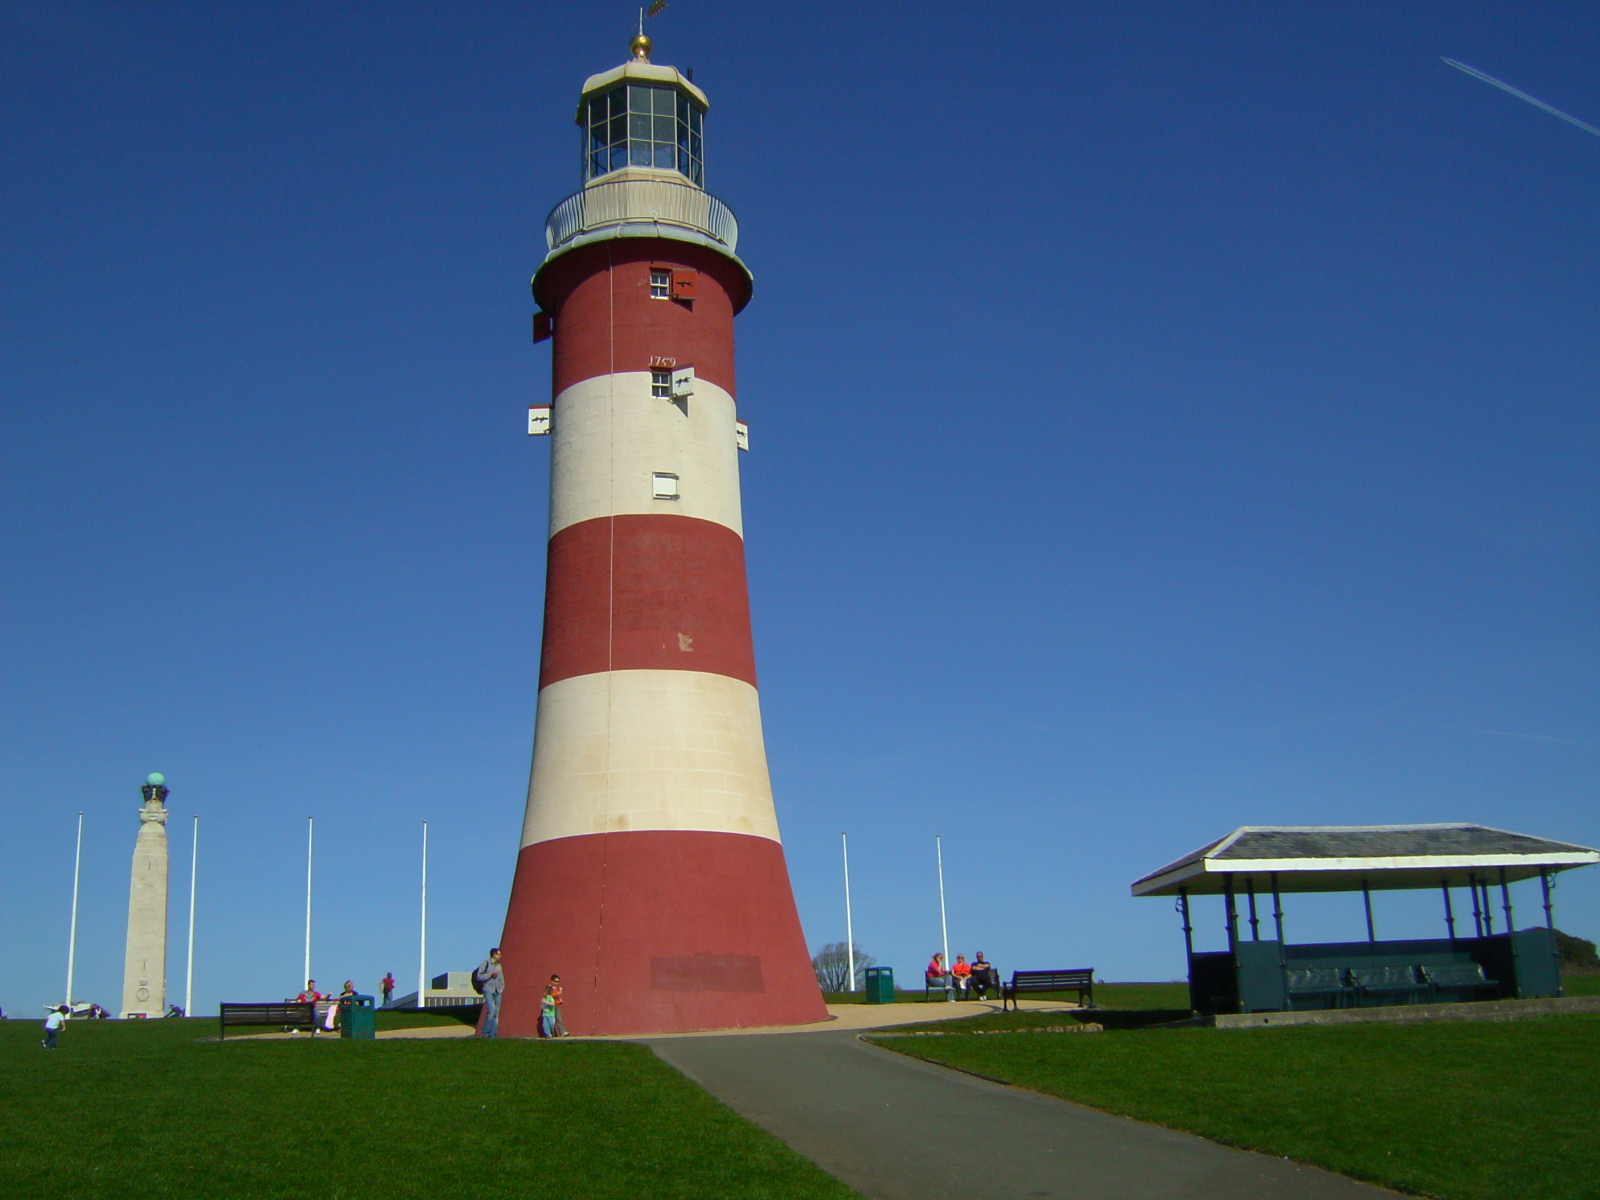 the lighthouse is built into the side of the hill